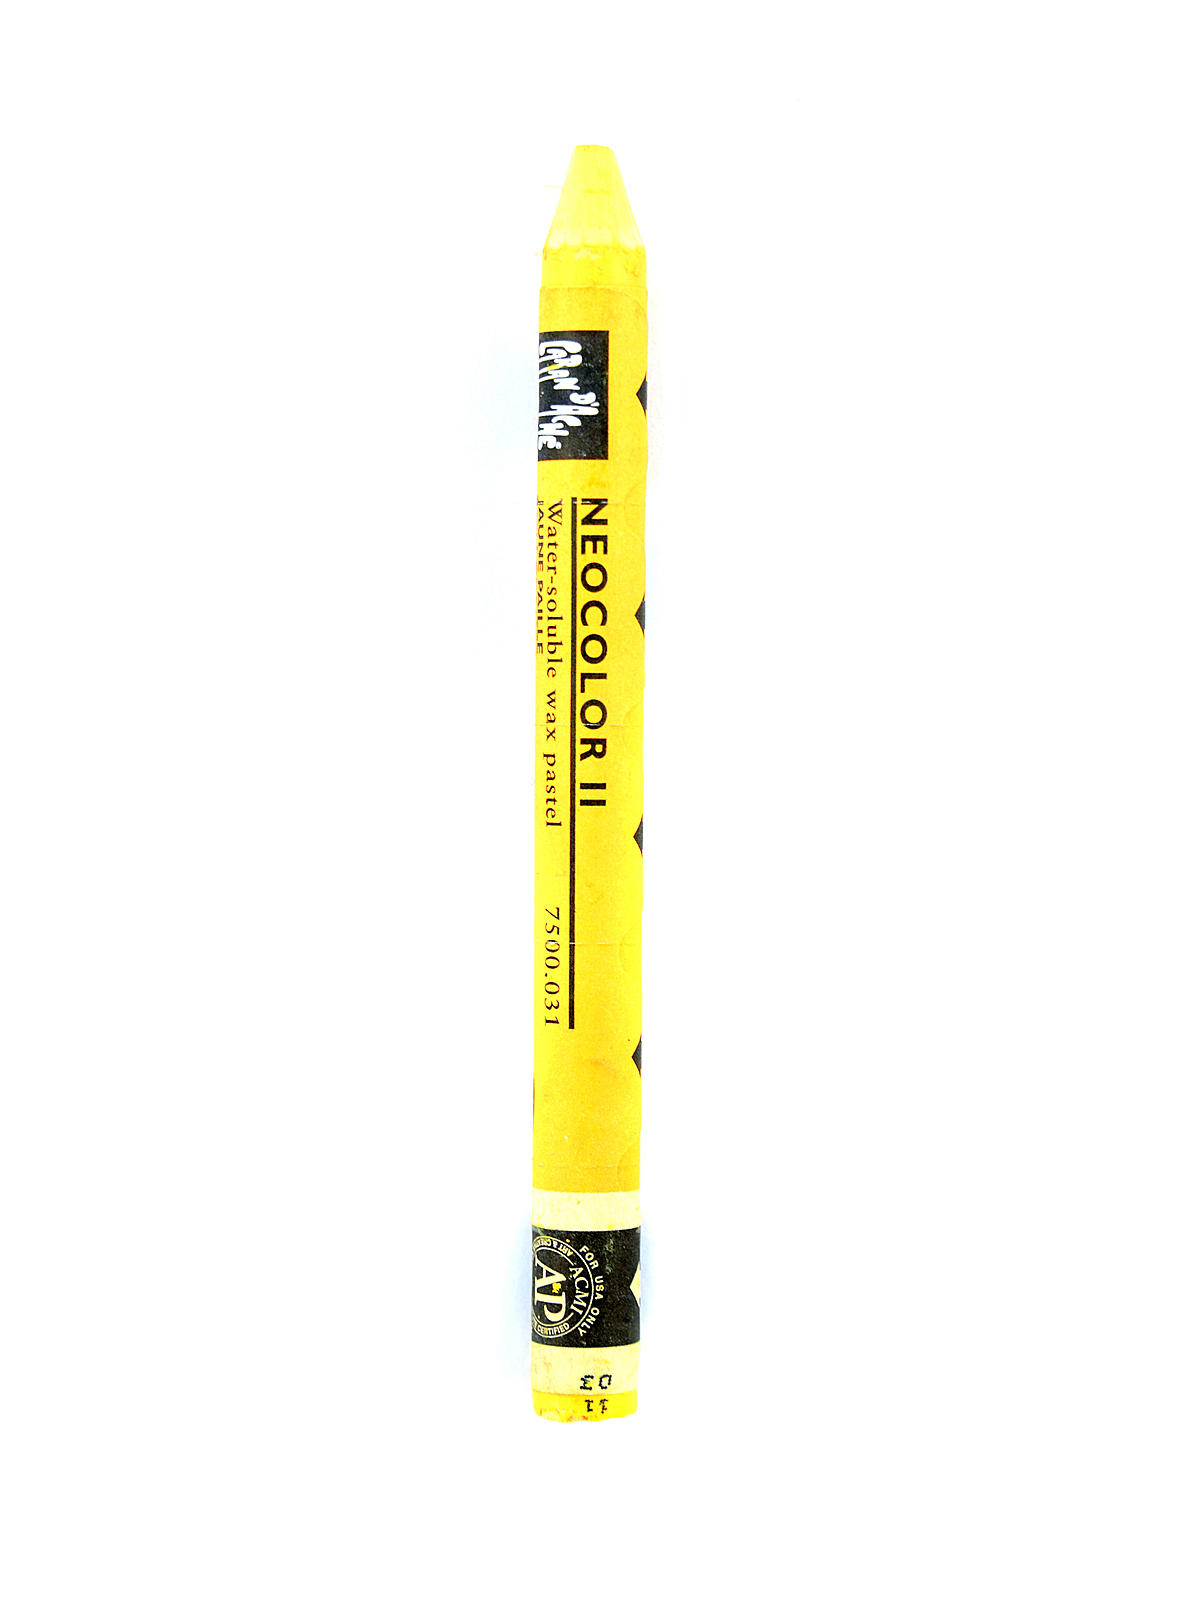 Neocolor Ii Aquarelle Water Soluble Wax Pastels Straw Yellow